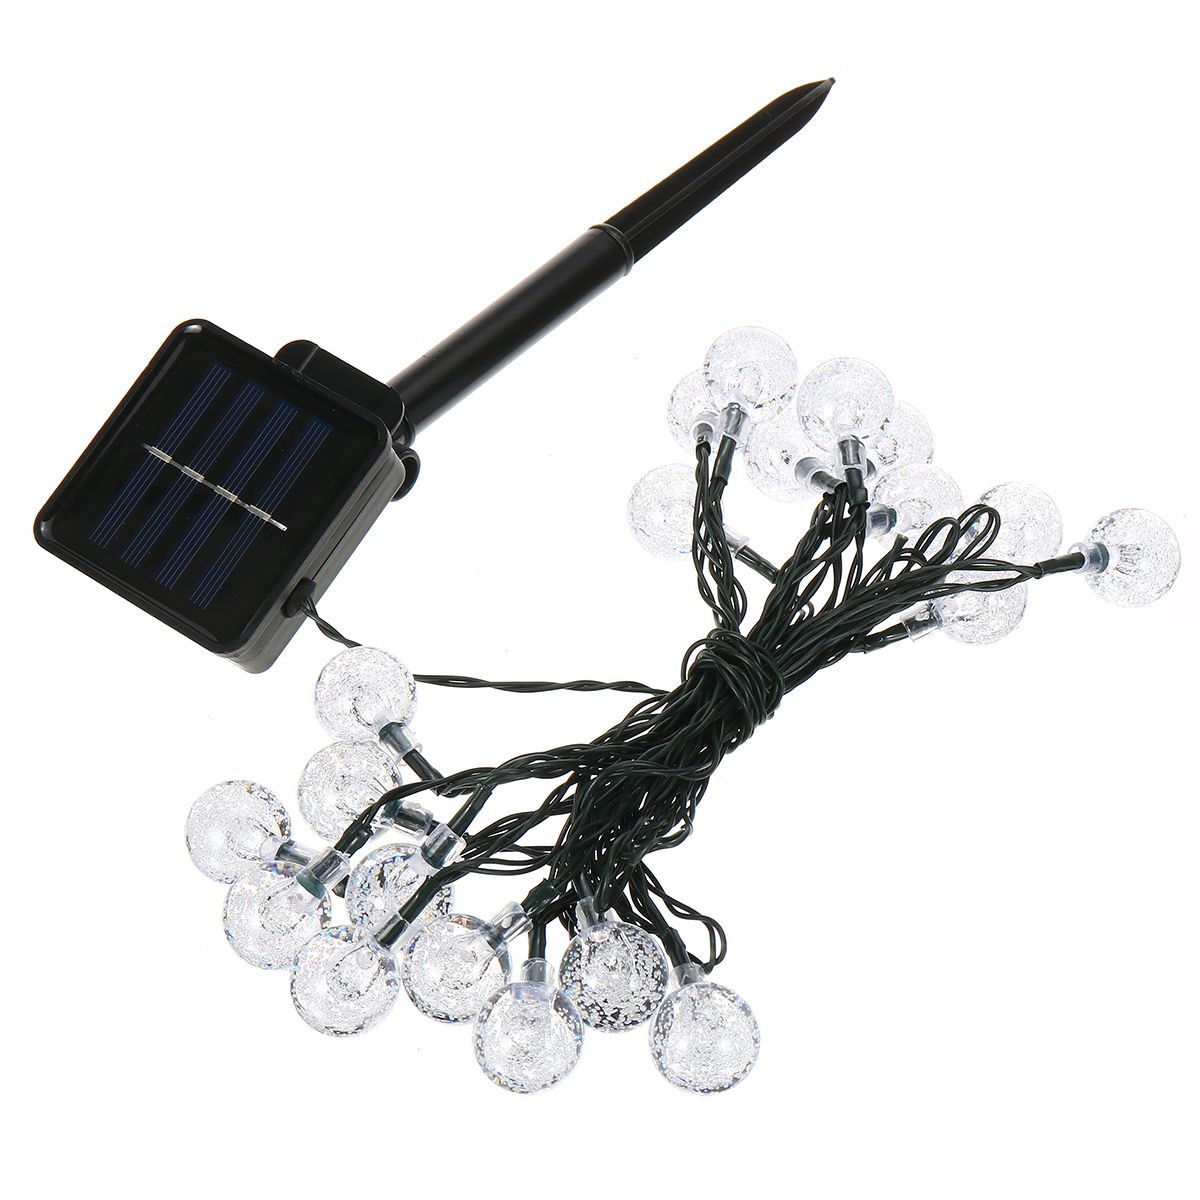 5M-Solar-Powered-20LED-String-Light-Two-Modes-Garden-Path-Yard-Decor-Lamp-Outdoor-Waterproof-1721941